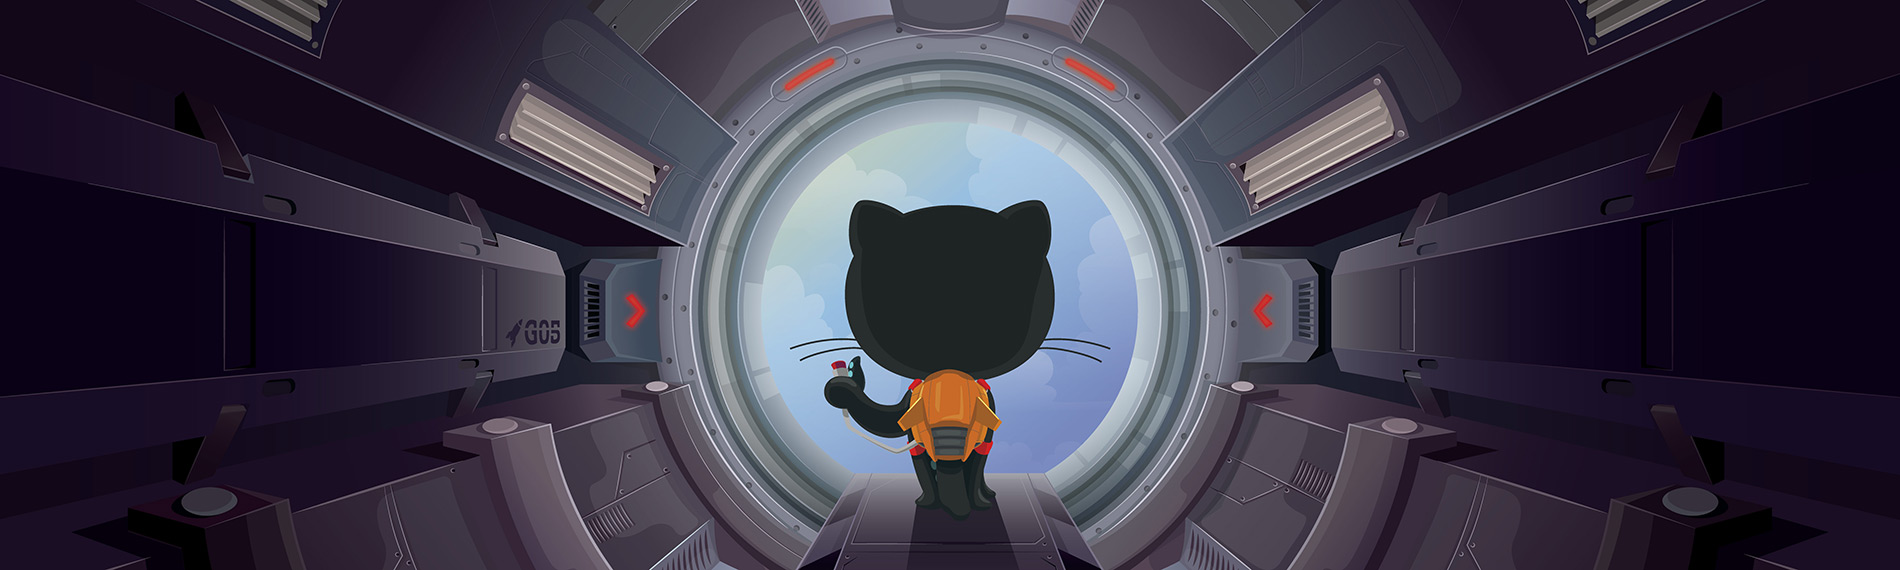 Image of the before view of the billboard, featuring the Octocat wearing a jetpack, preparing to blast out of a tunnel. There is no text, but the silhouette of the Octocat in the circle opening looks like the GitHub logo.